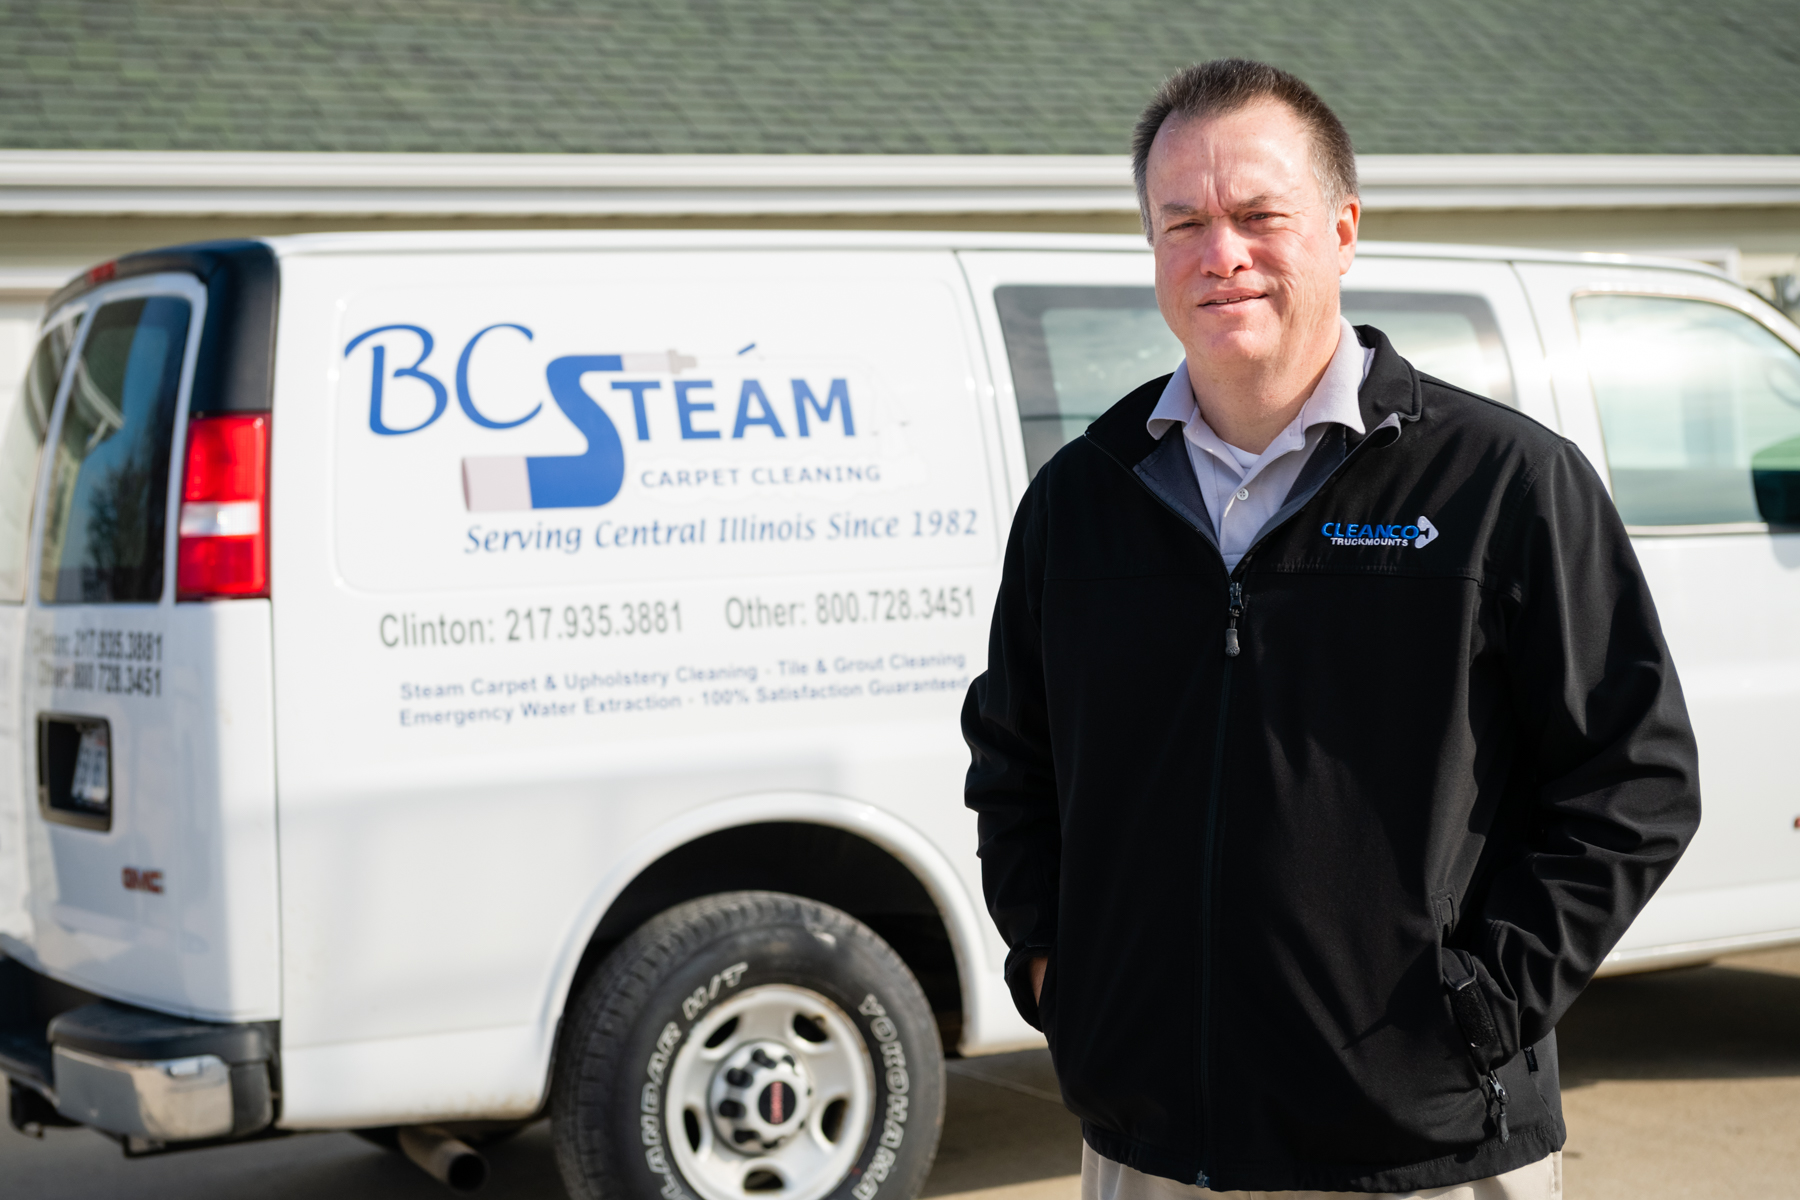 B.C. Steam Cleaning Services 8200 Idlewood Rd, Clinton Illinois 61727